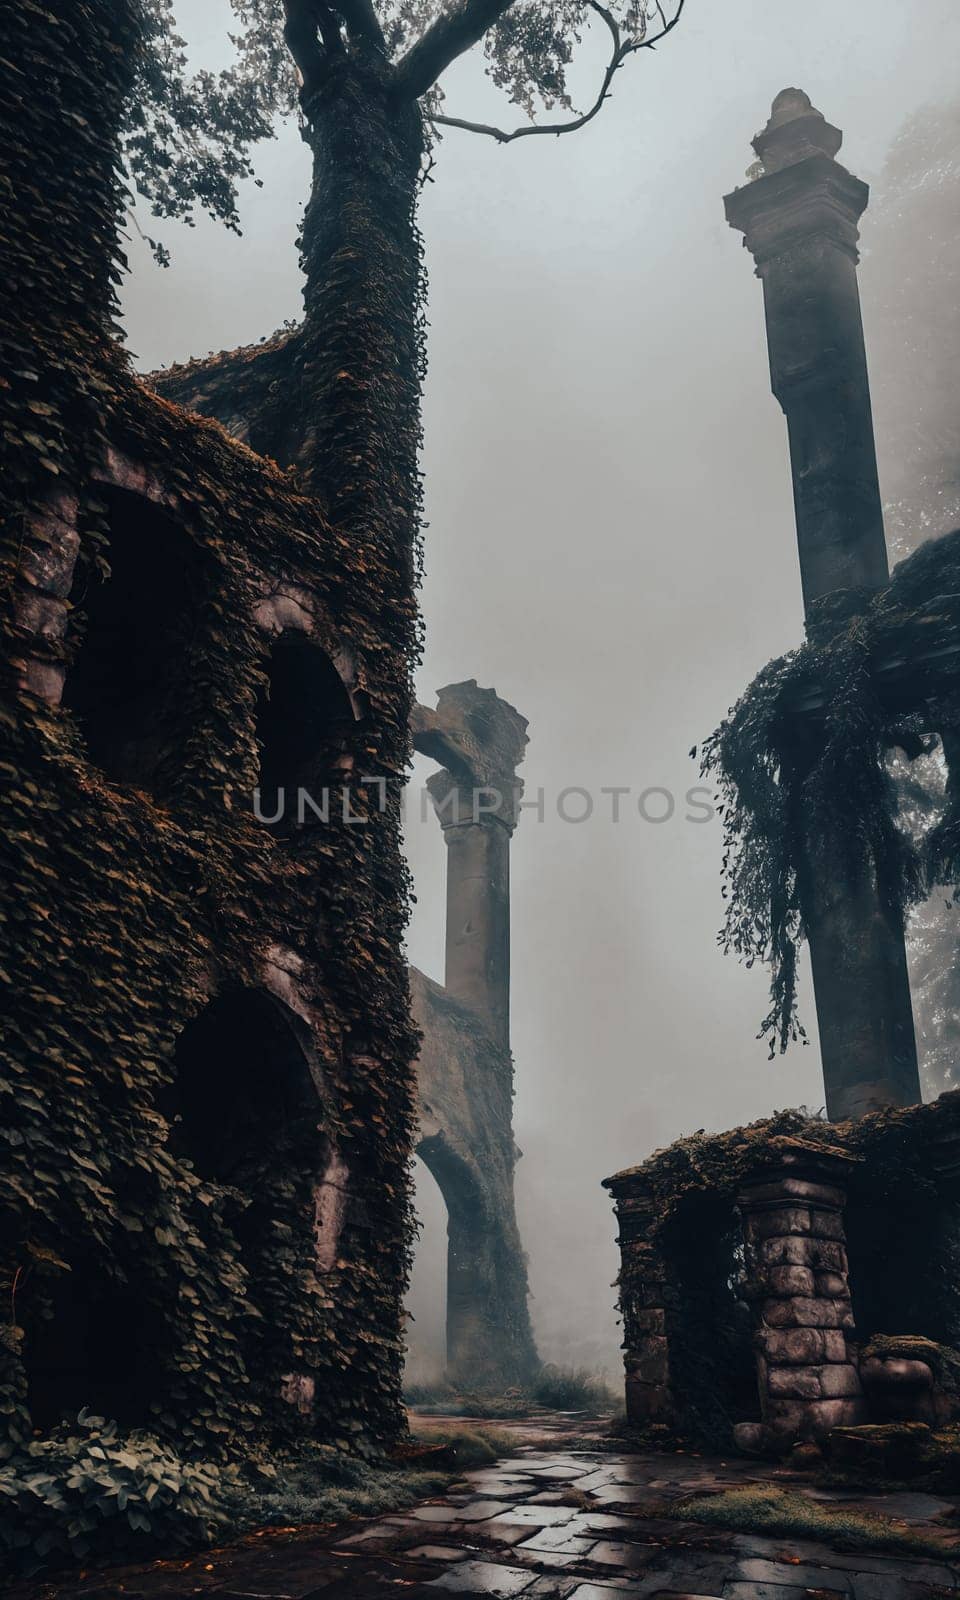 Mist-Clad Ruins. The remnants of an ancient castle, shrouded in mist. Ivy-clad walls crumble gracefully, and forgotten statues guard the entrance.